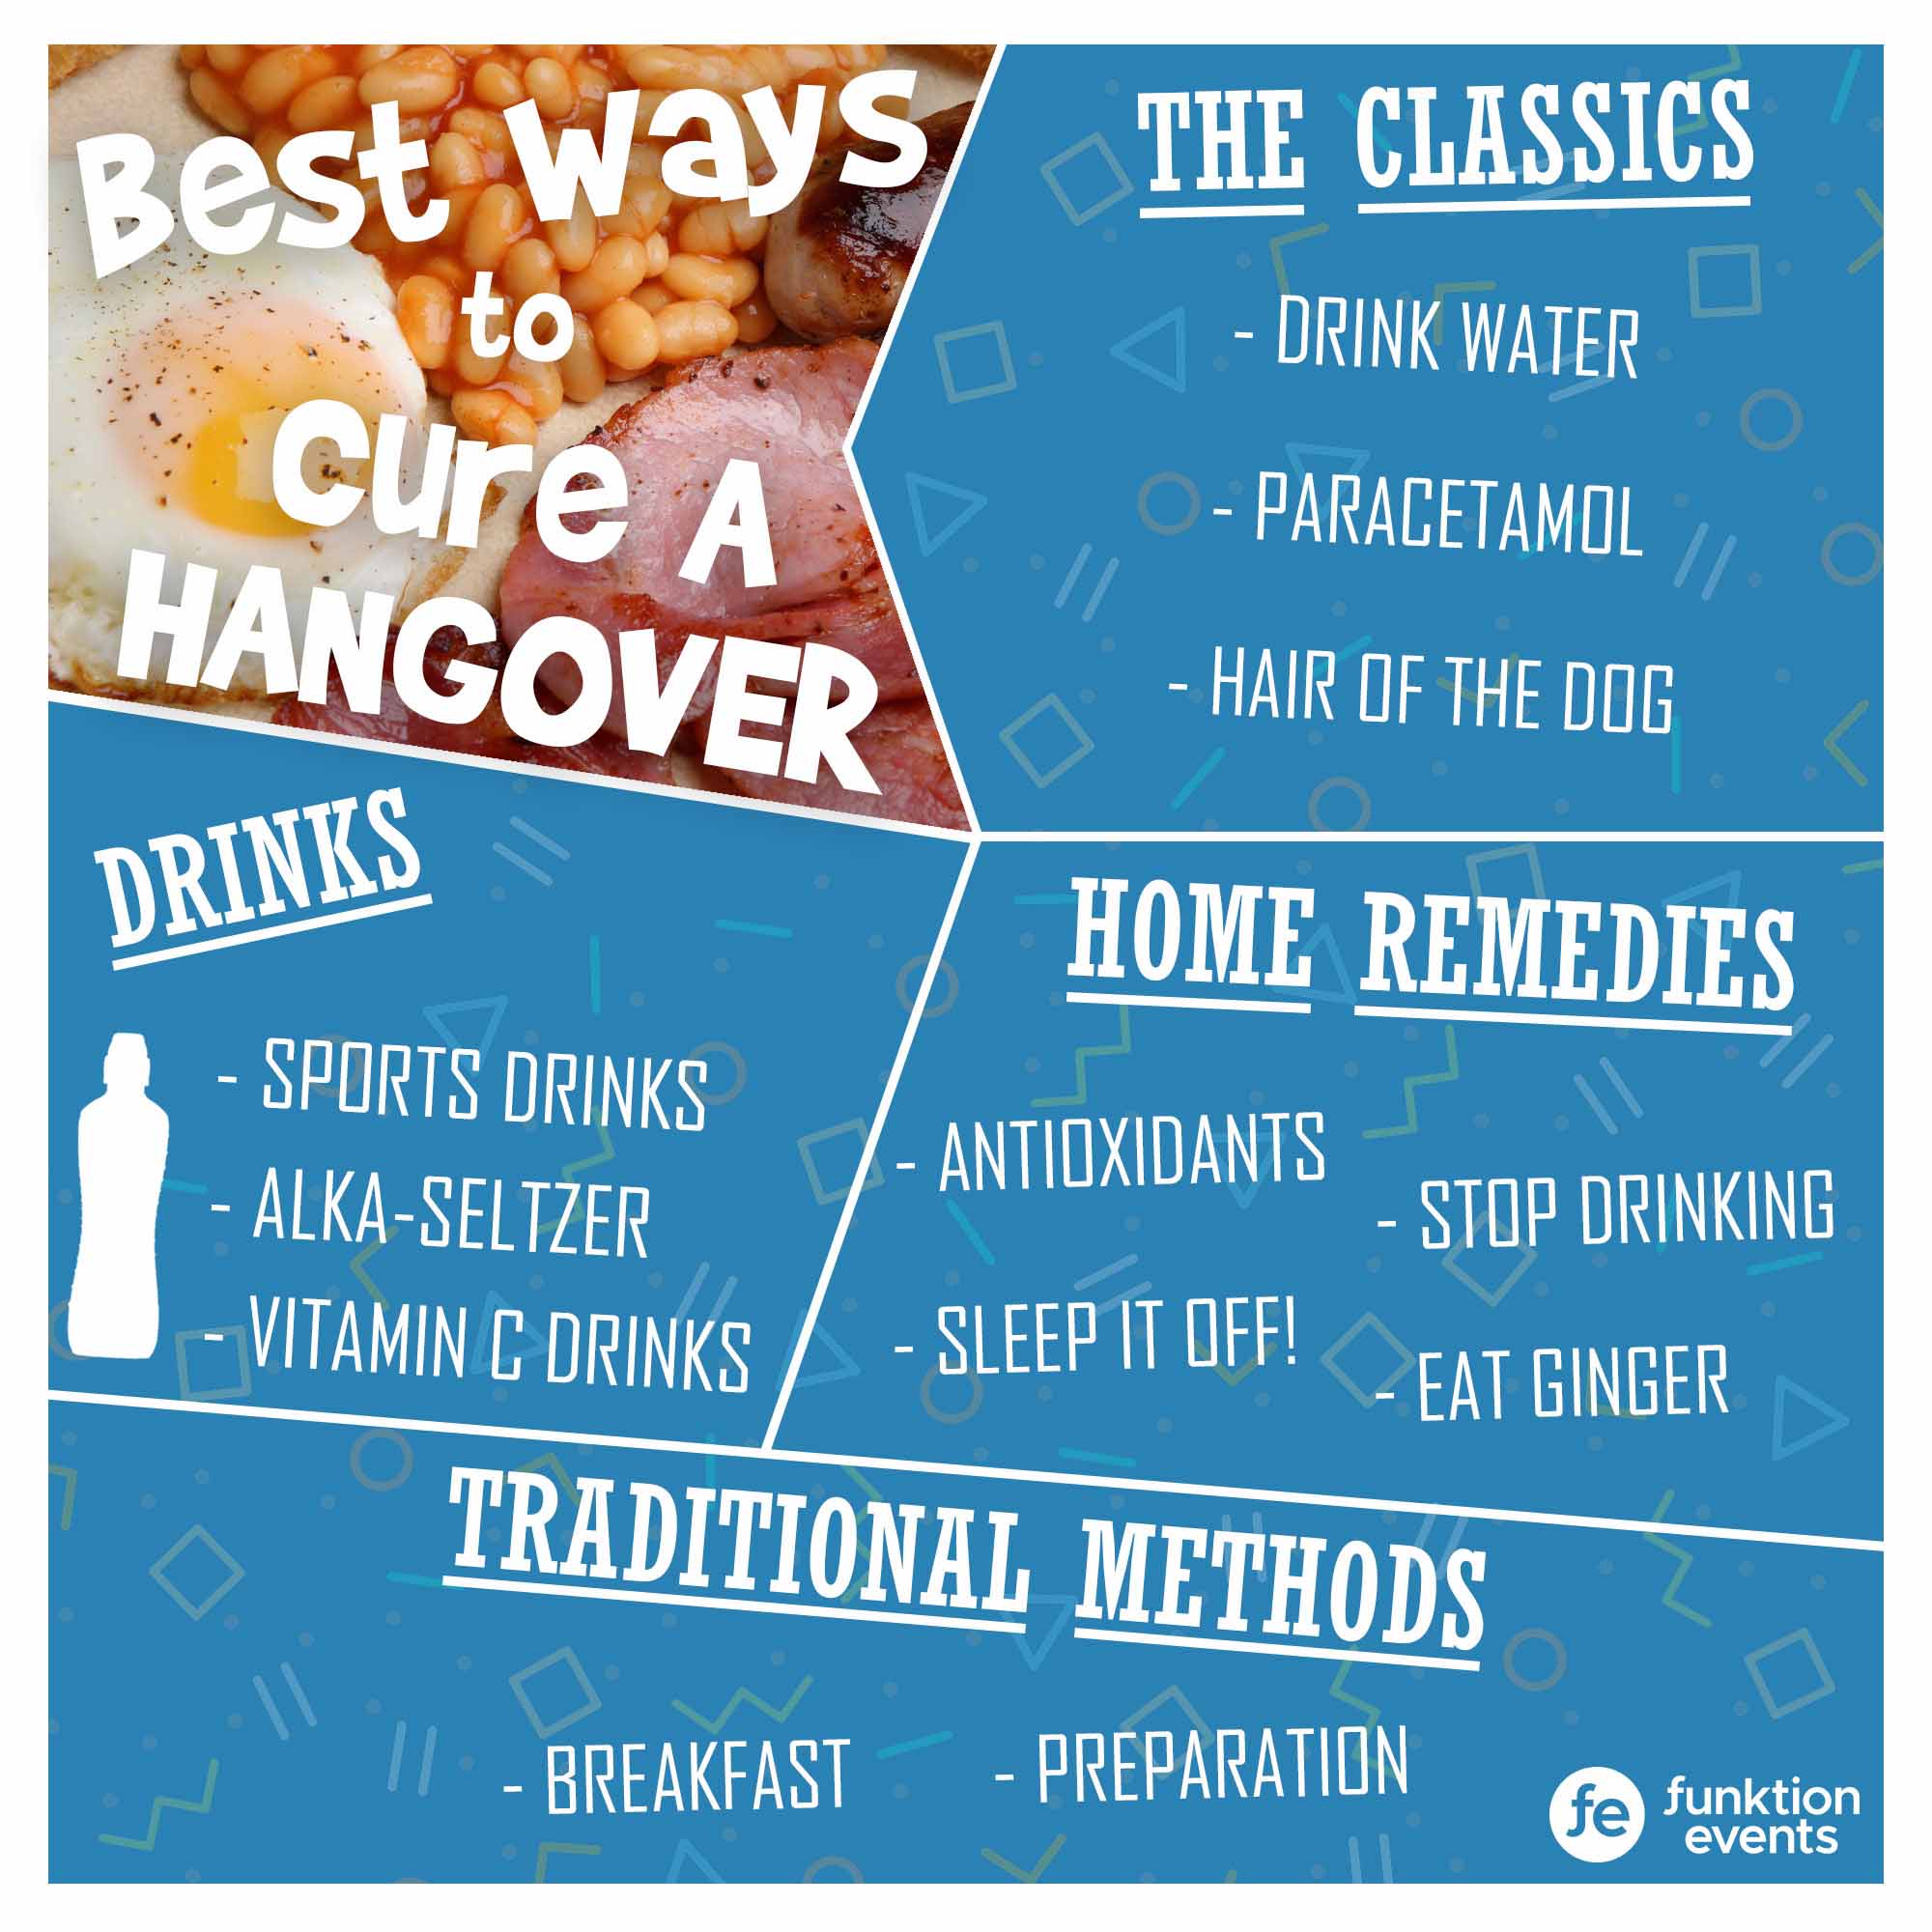 Best Ways to Cure a Hangover?